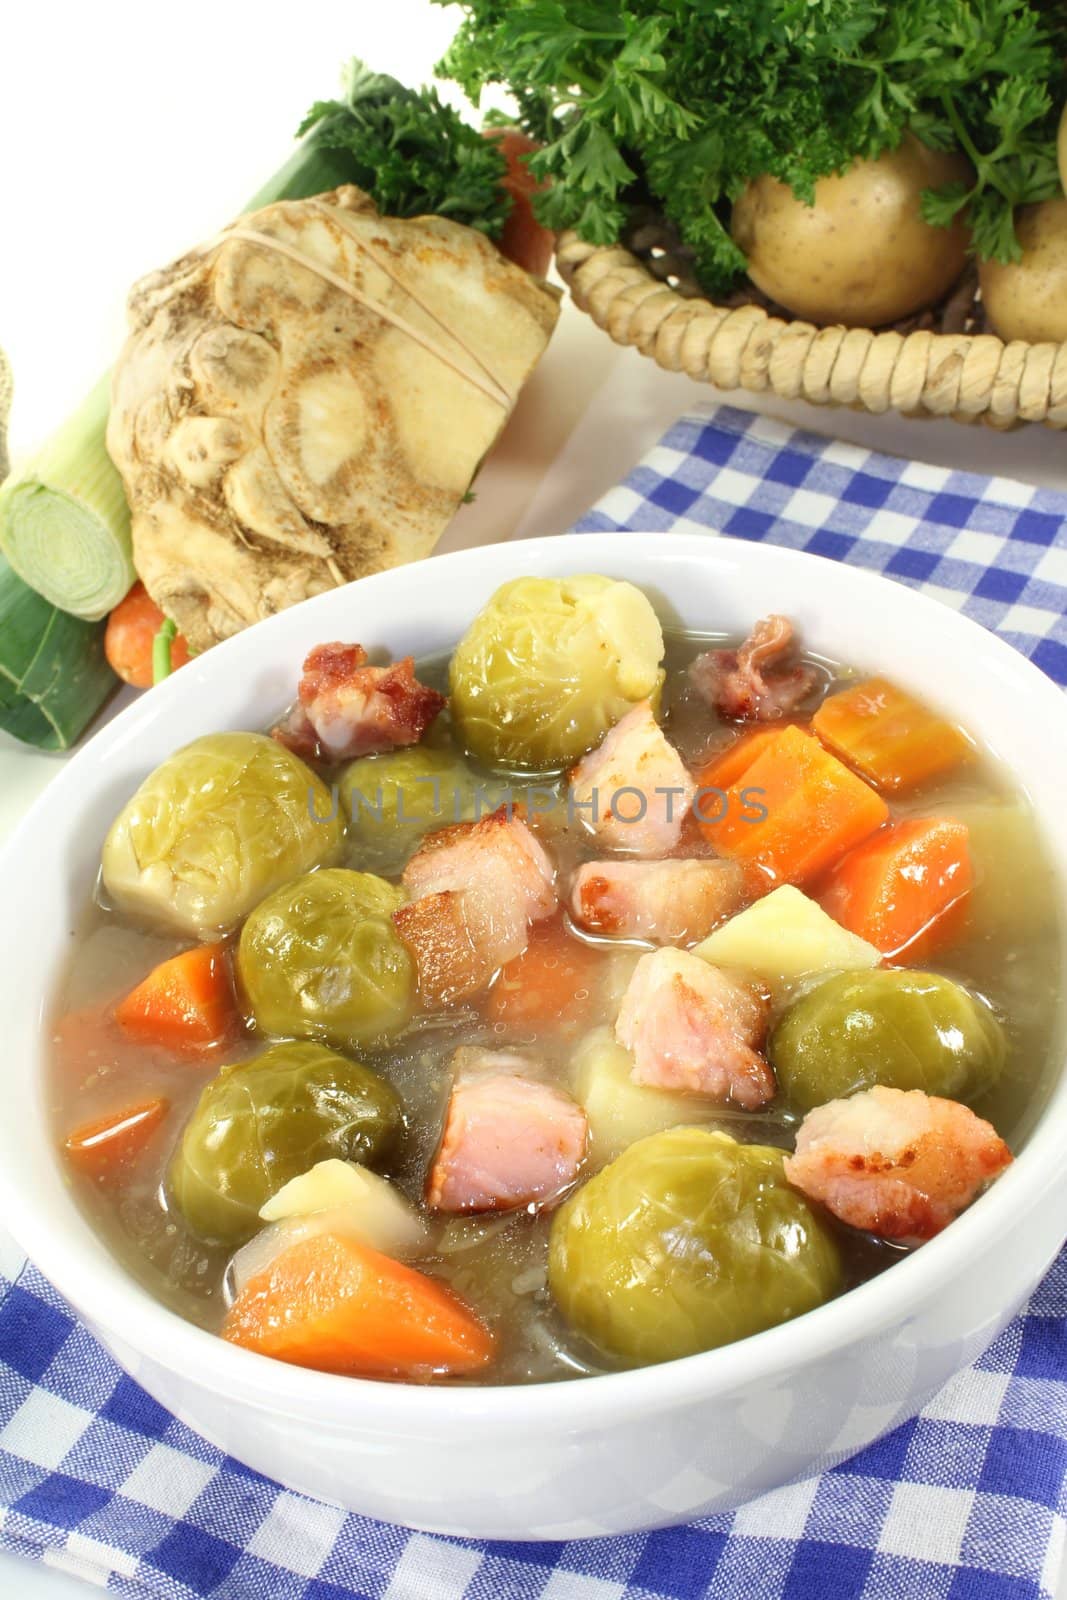 Brussels sprouts stew by silencefoto